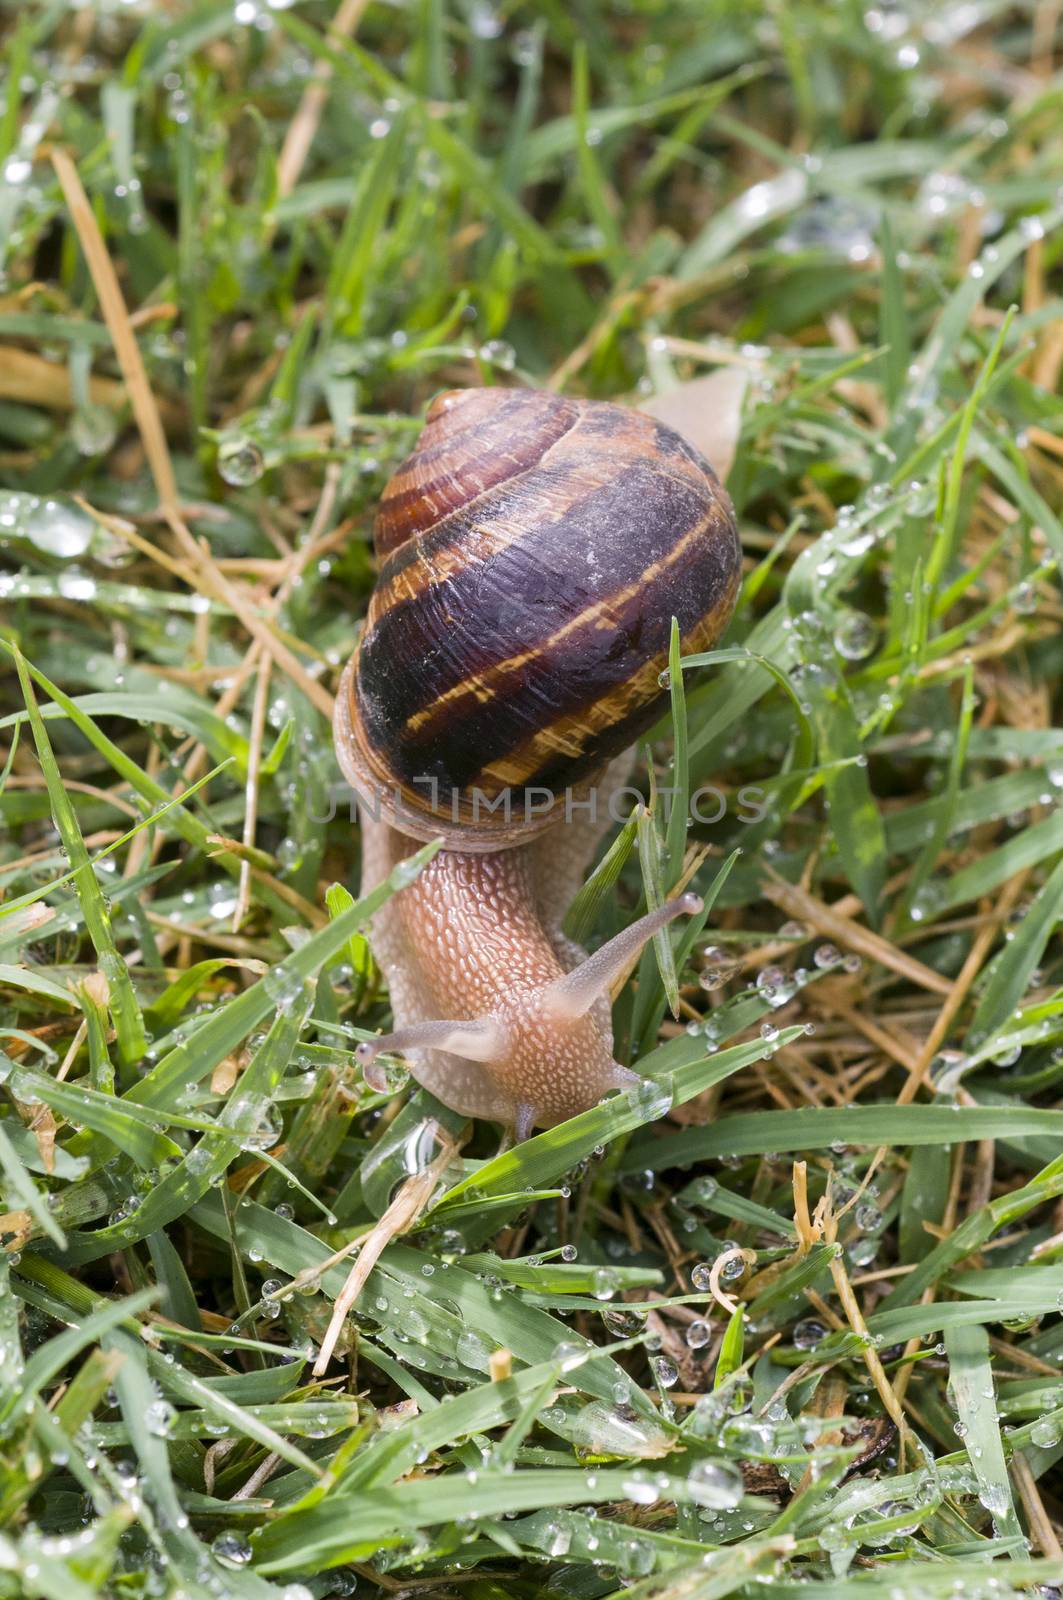 Snail moving on wet grass after rain by Njean